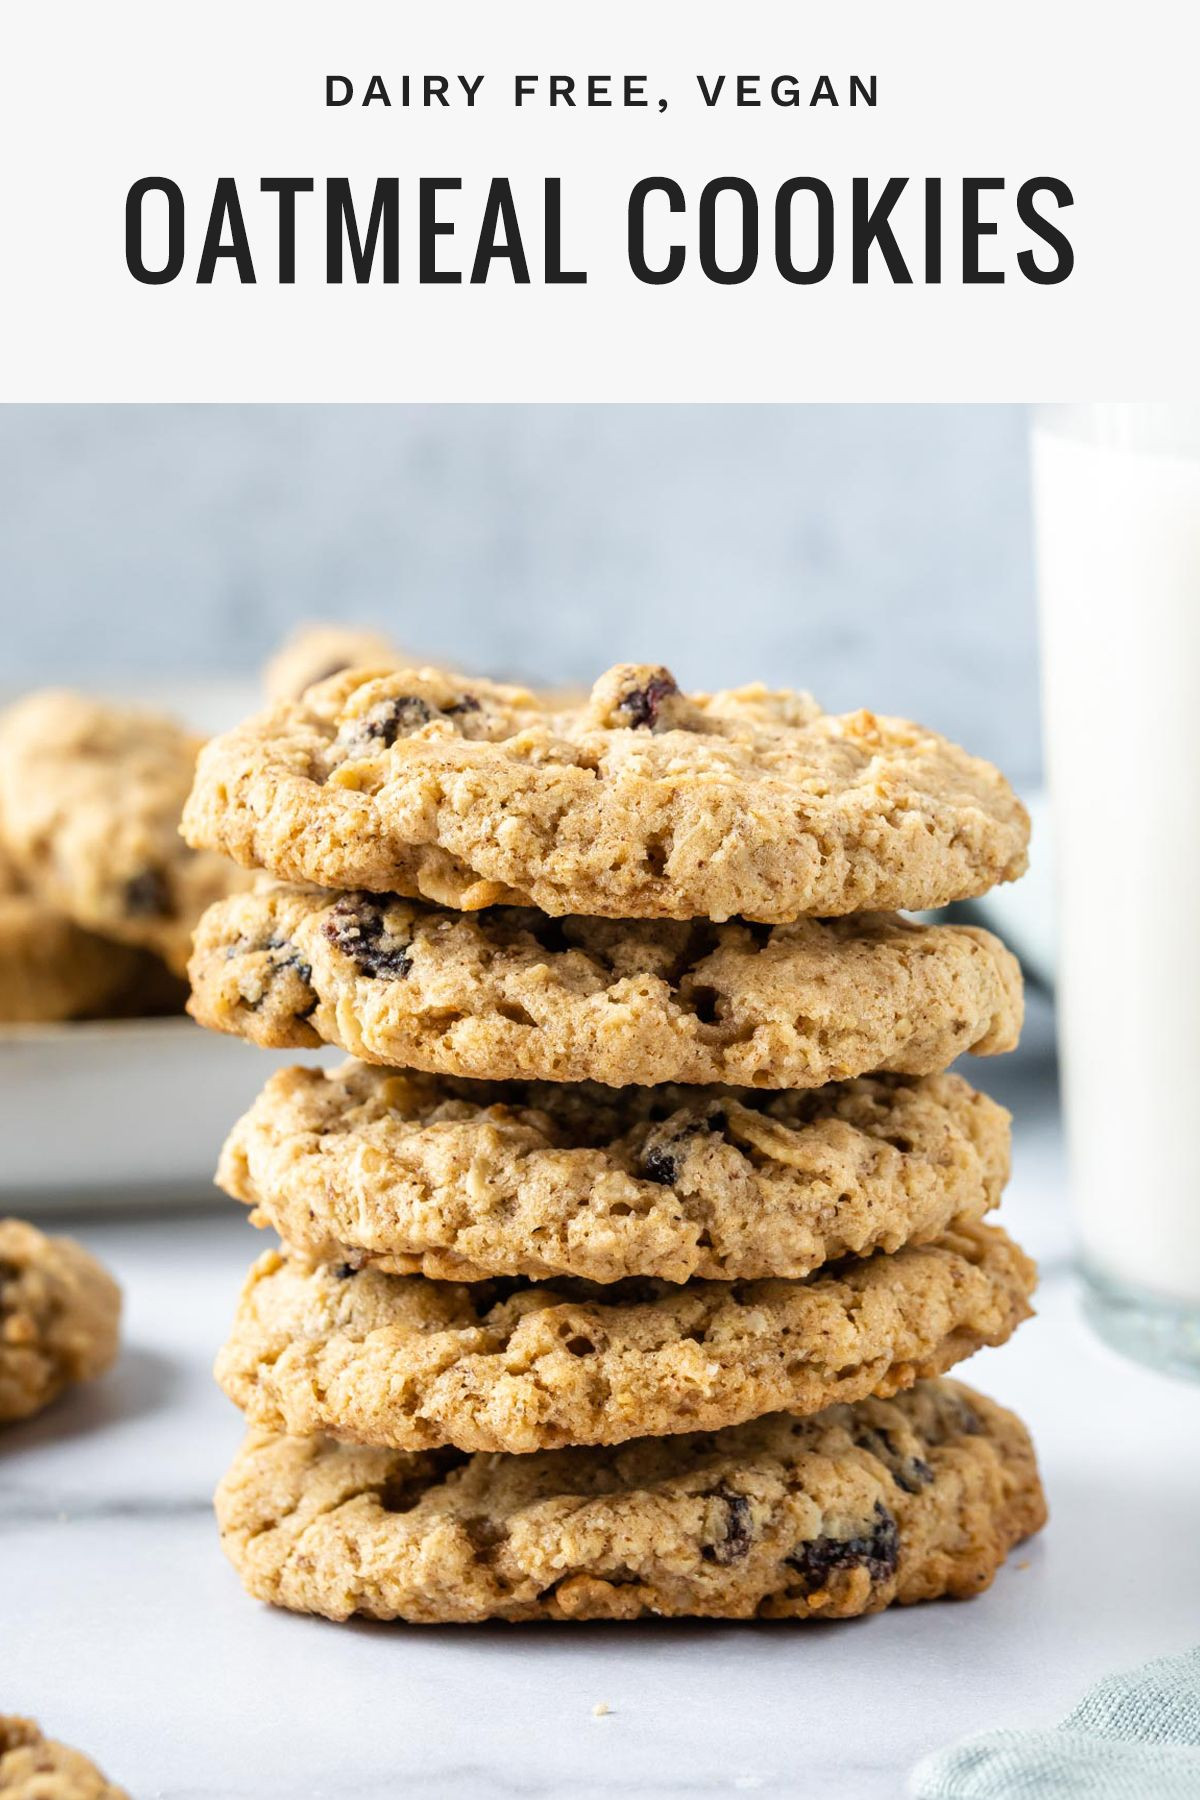 Oatmeal Cookies Recipe Without Eggs
 The BEST Vegan Oatmeal Cookies Recipe Simply Whisked